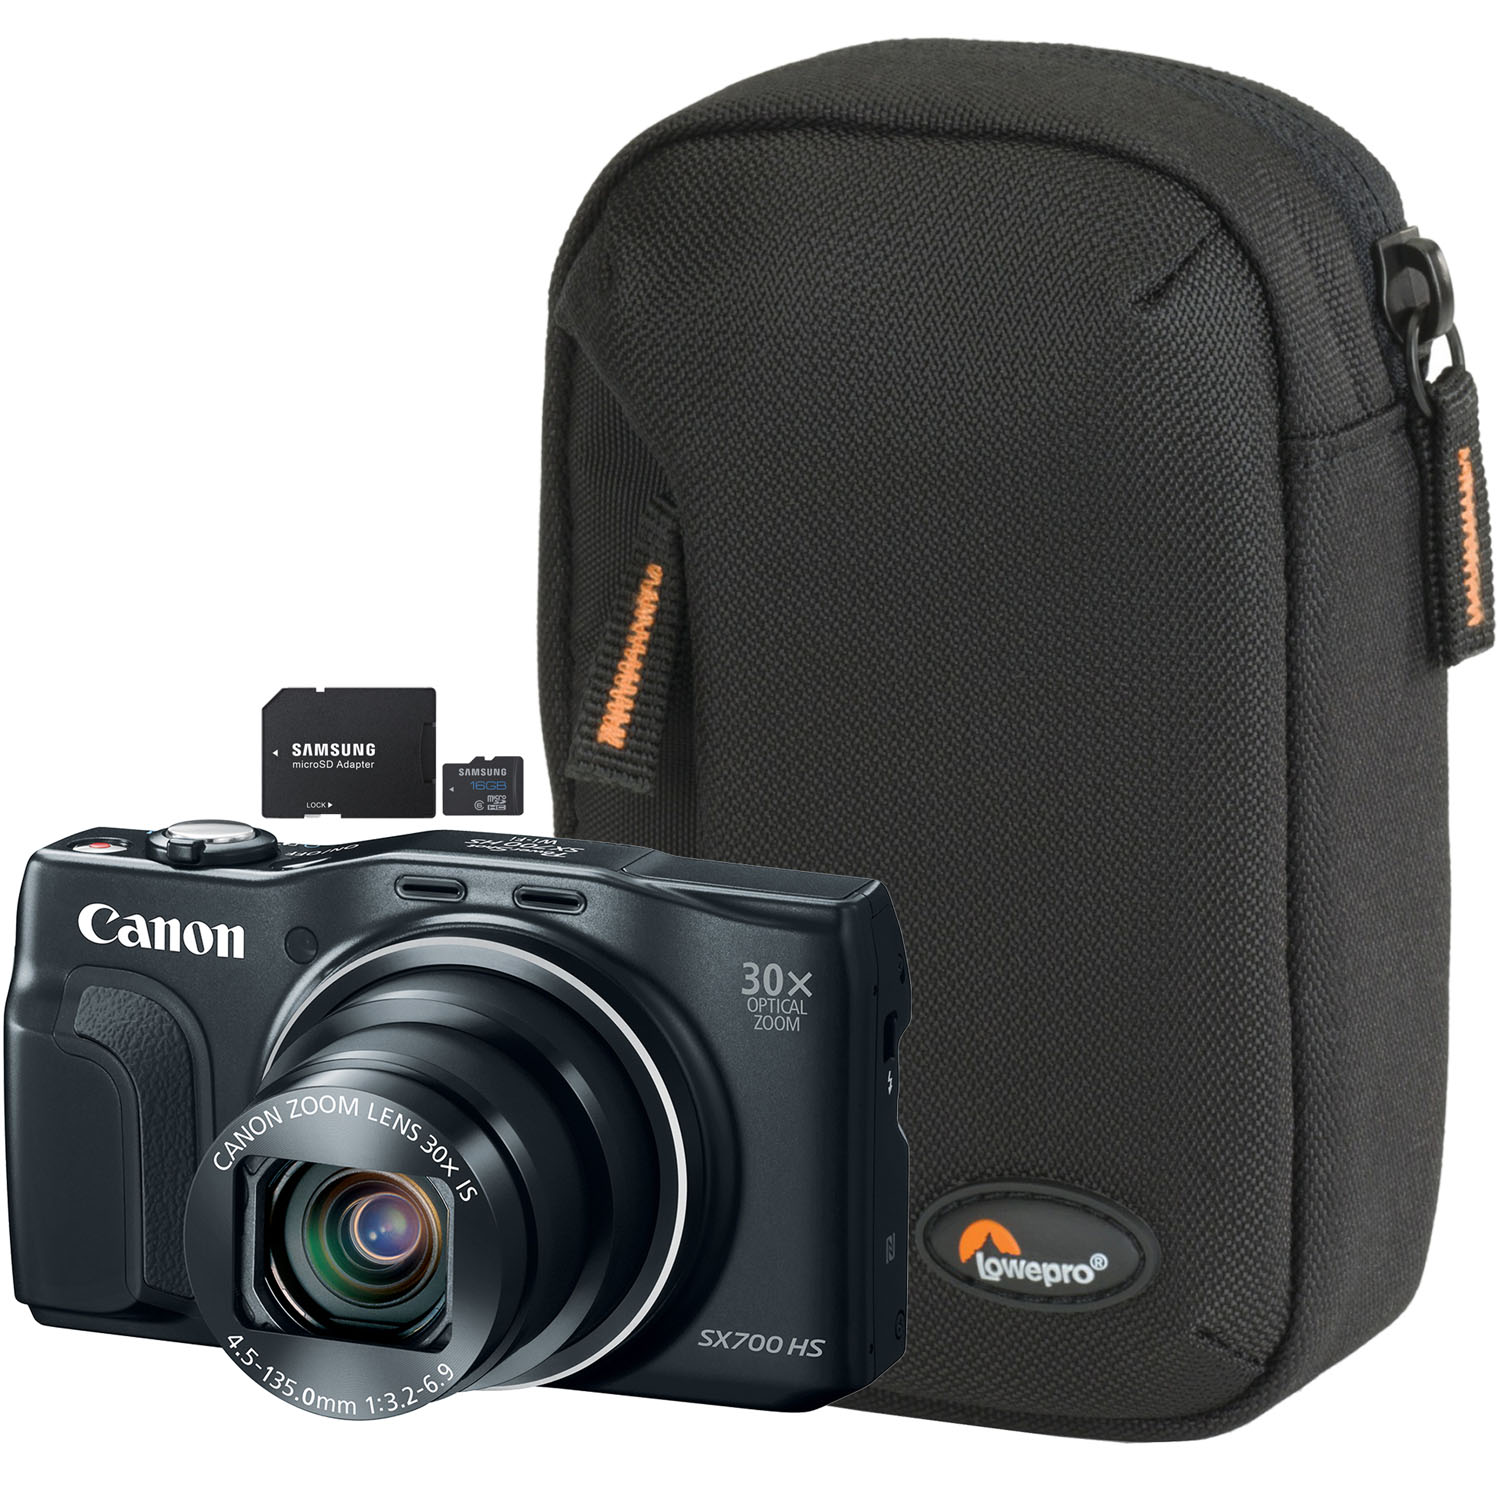 PowerShot SX700 HS Black 16.1MP Digital Camera, Compact Case and 16GB microSD Card with Adapter